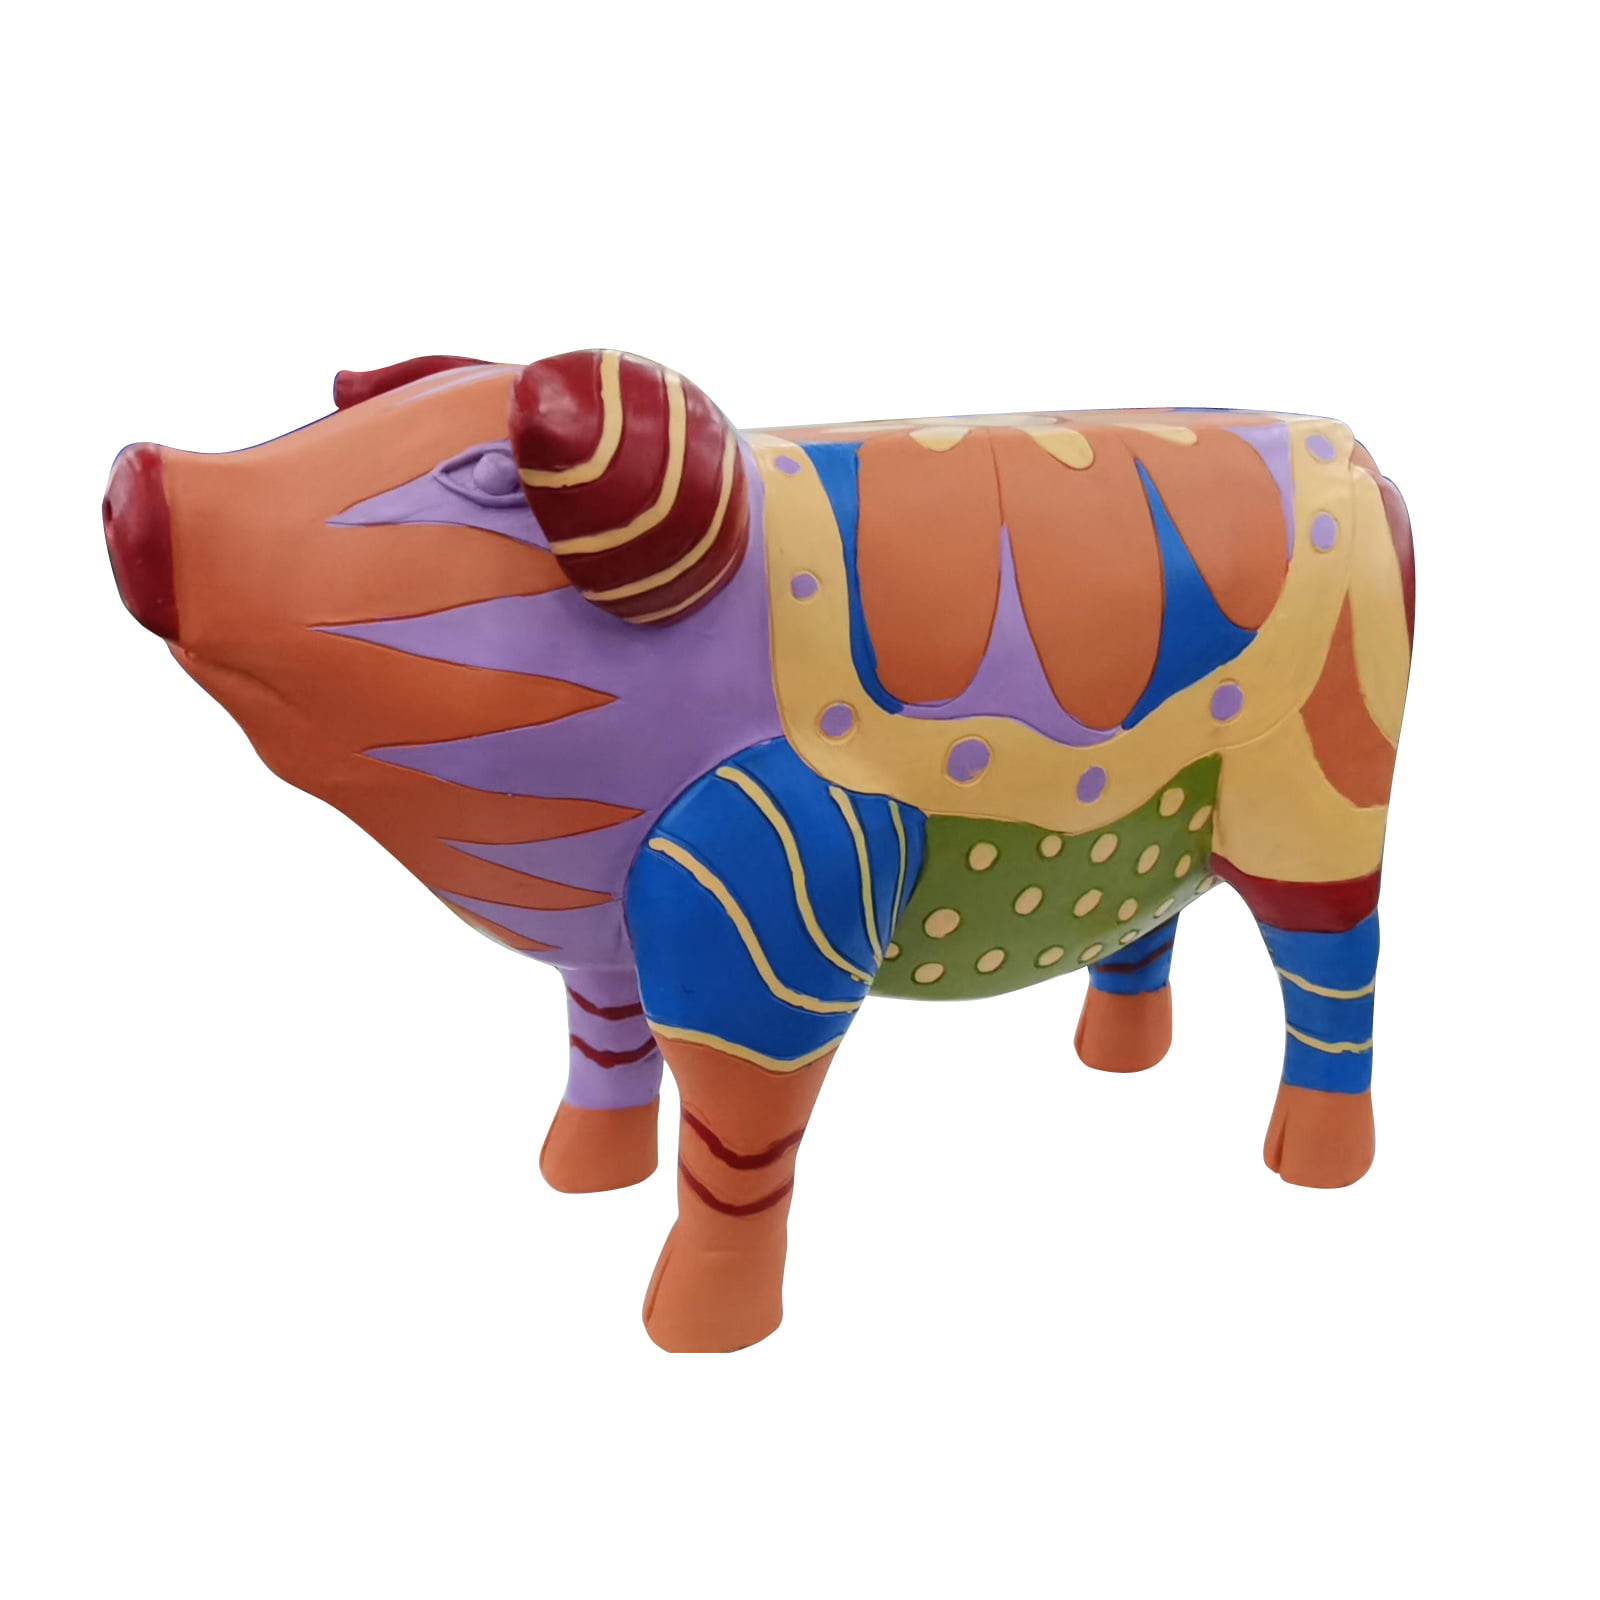 Animal Resin Statues Table Resin Statues Pig Side Table Pig Patio Side Table Bistro Tables Sculptures Crafts for Garden Courtyard Landsca Colorful Folk Art Patio Furniture Animal Outdoor bar Table 